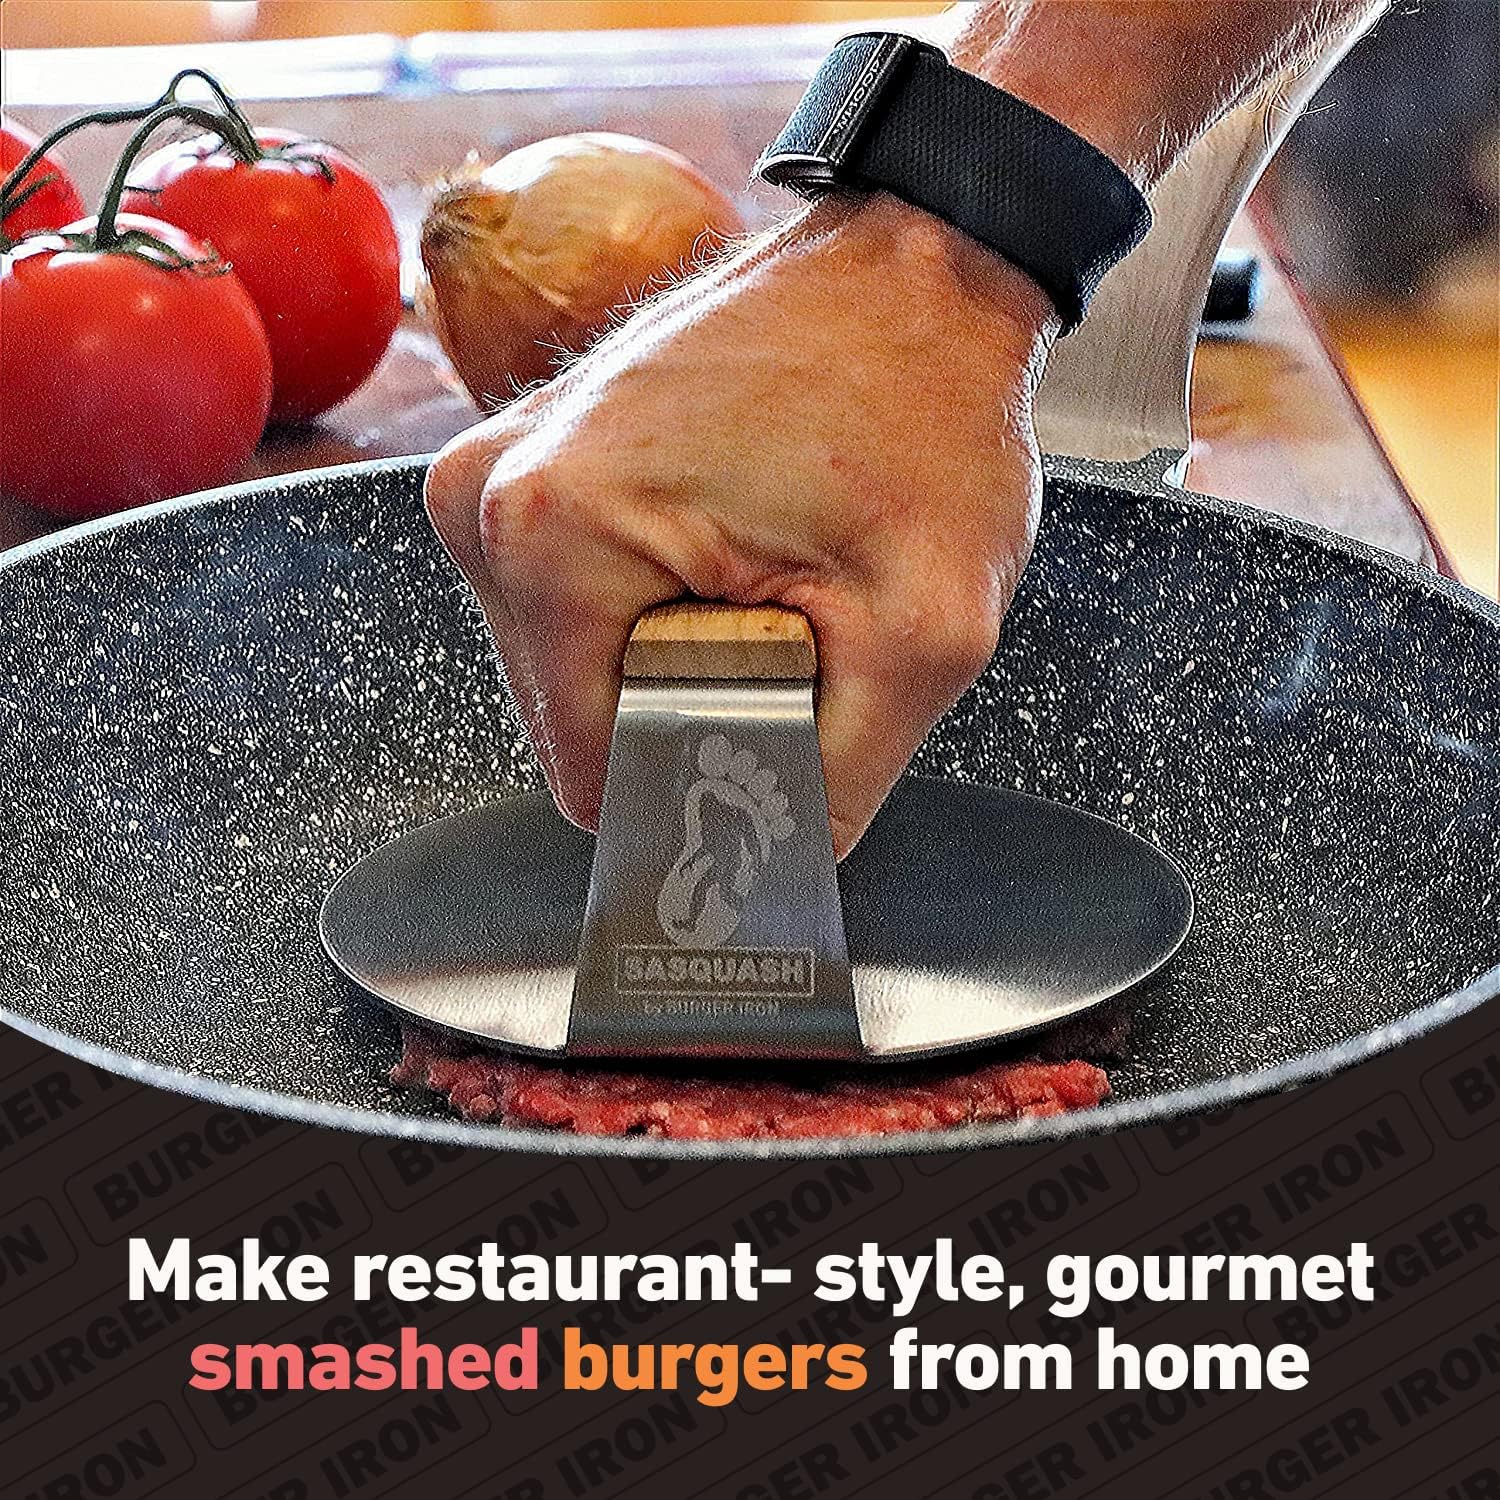 The Sasquash Indestructible Burger Smasher - Professional Grade Wide Flat Handle Smashed Burger Press - Heavy Duty One-Piece Welded Stainless Steel BBQ Griddle and Grill Tool (Square)